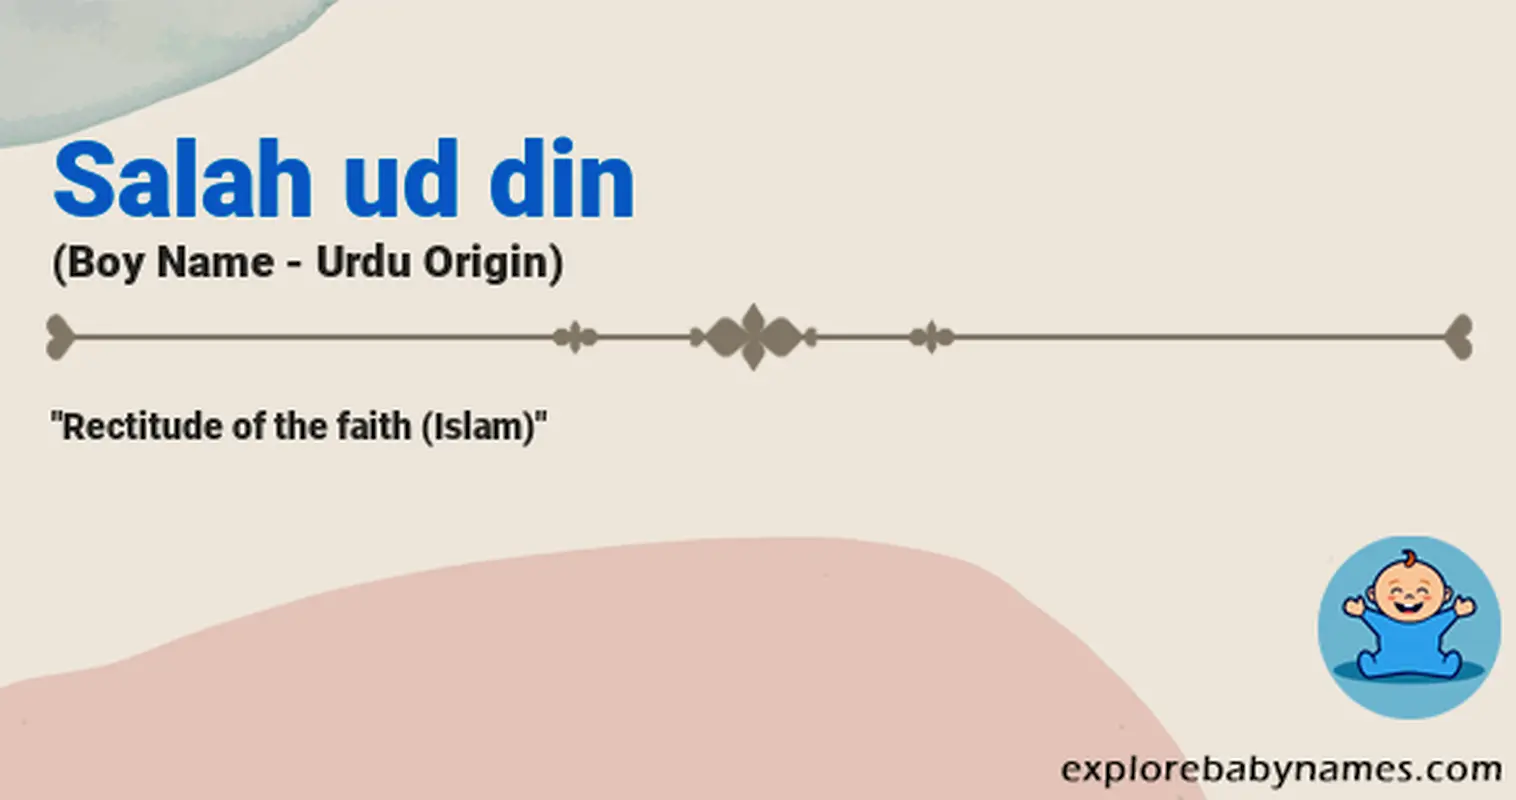 Meaning of Salah ud din